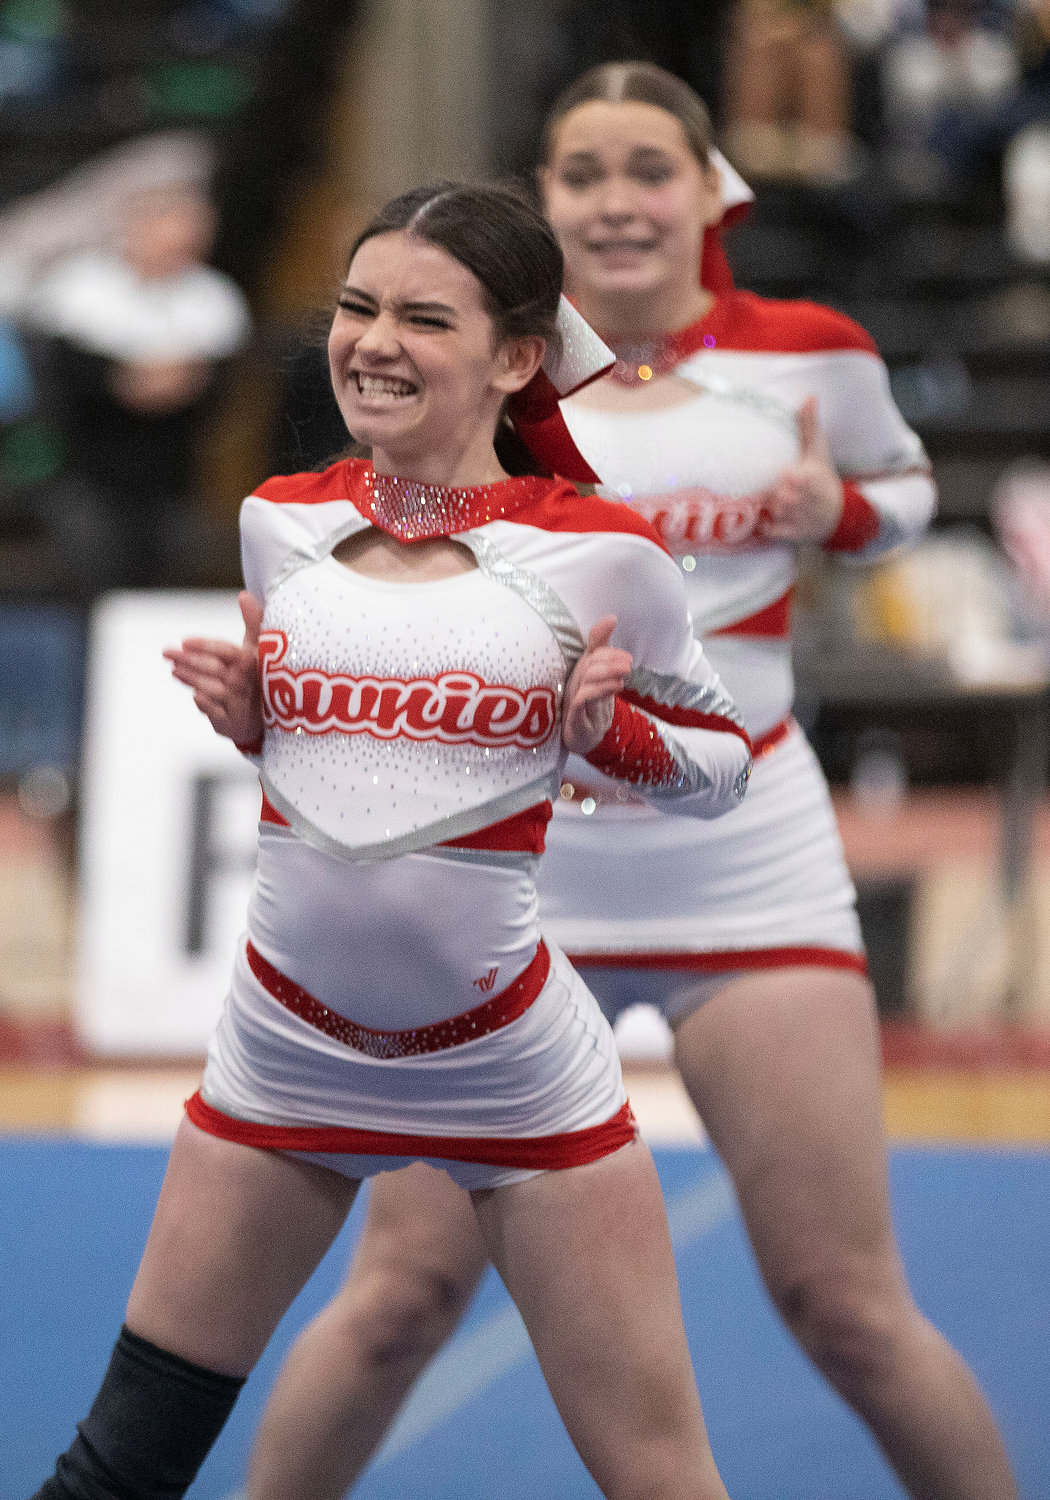 Mackenzie Pacheco performs during the dance portion of the Townies routine.